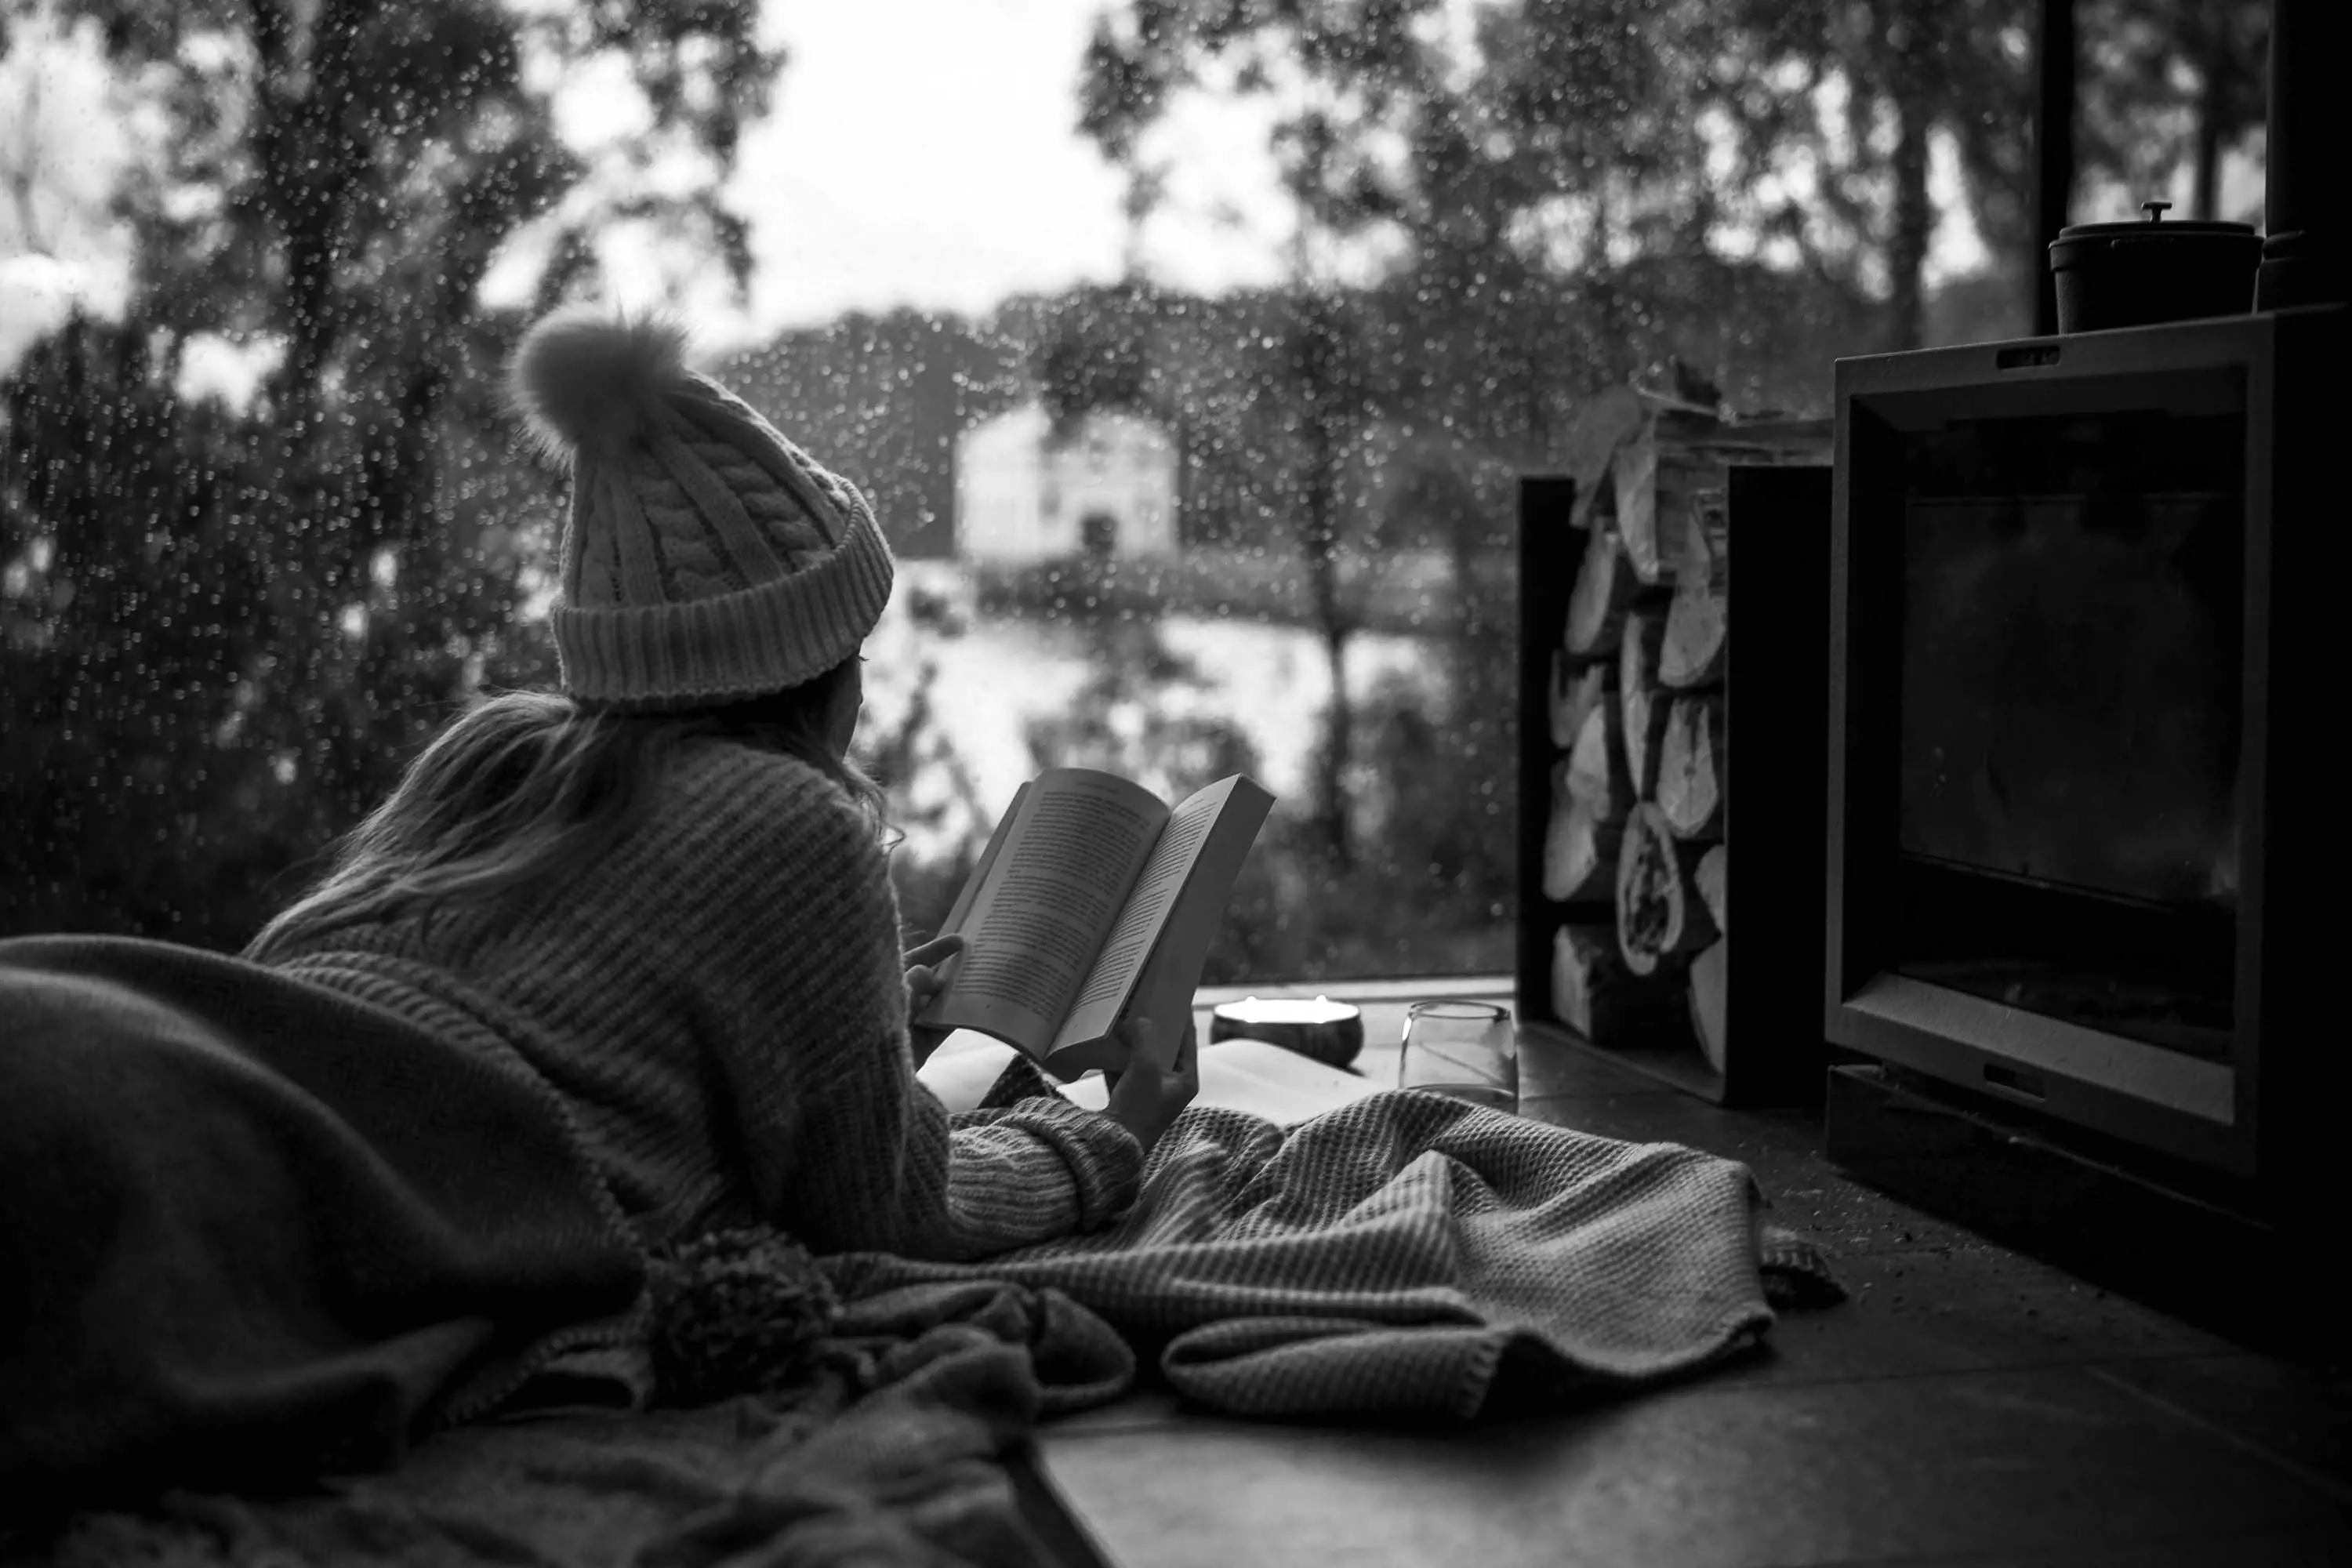 A young woman wearing a beanie and wrapped in a blanket reads a book lying on a rug beside a fire, with a lake seen through a large window in in the background.